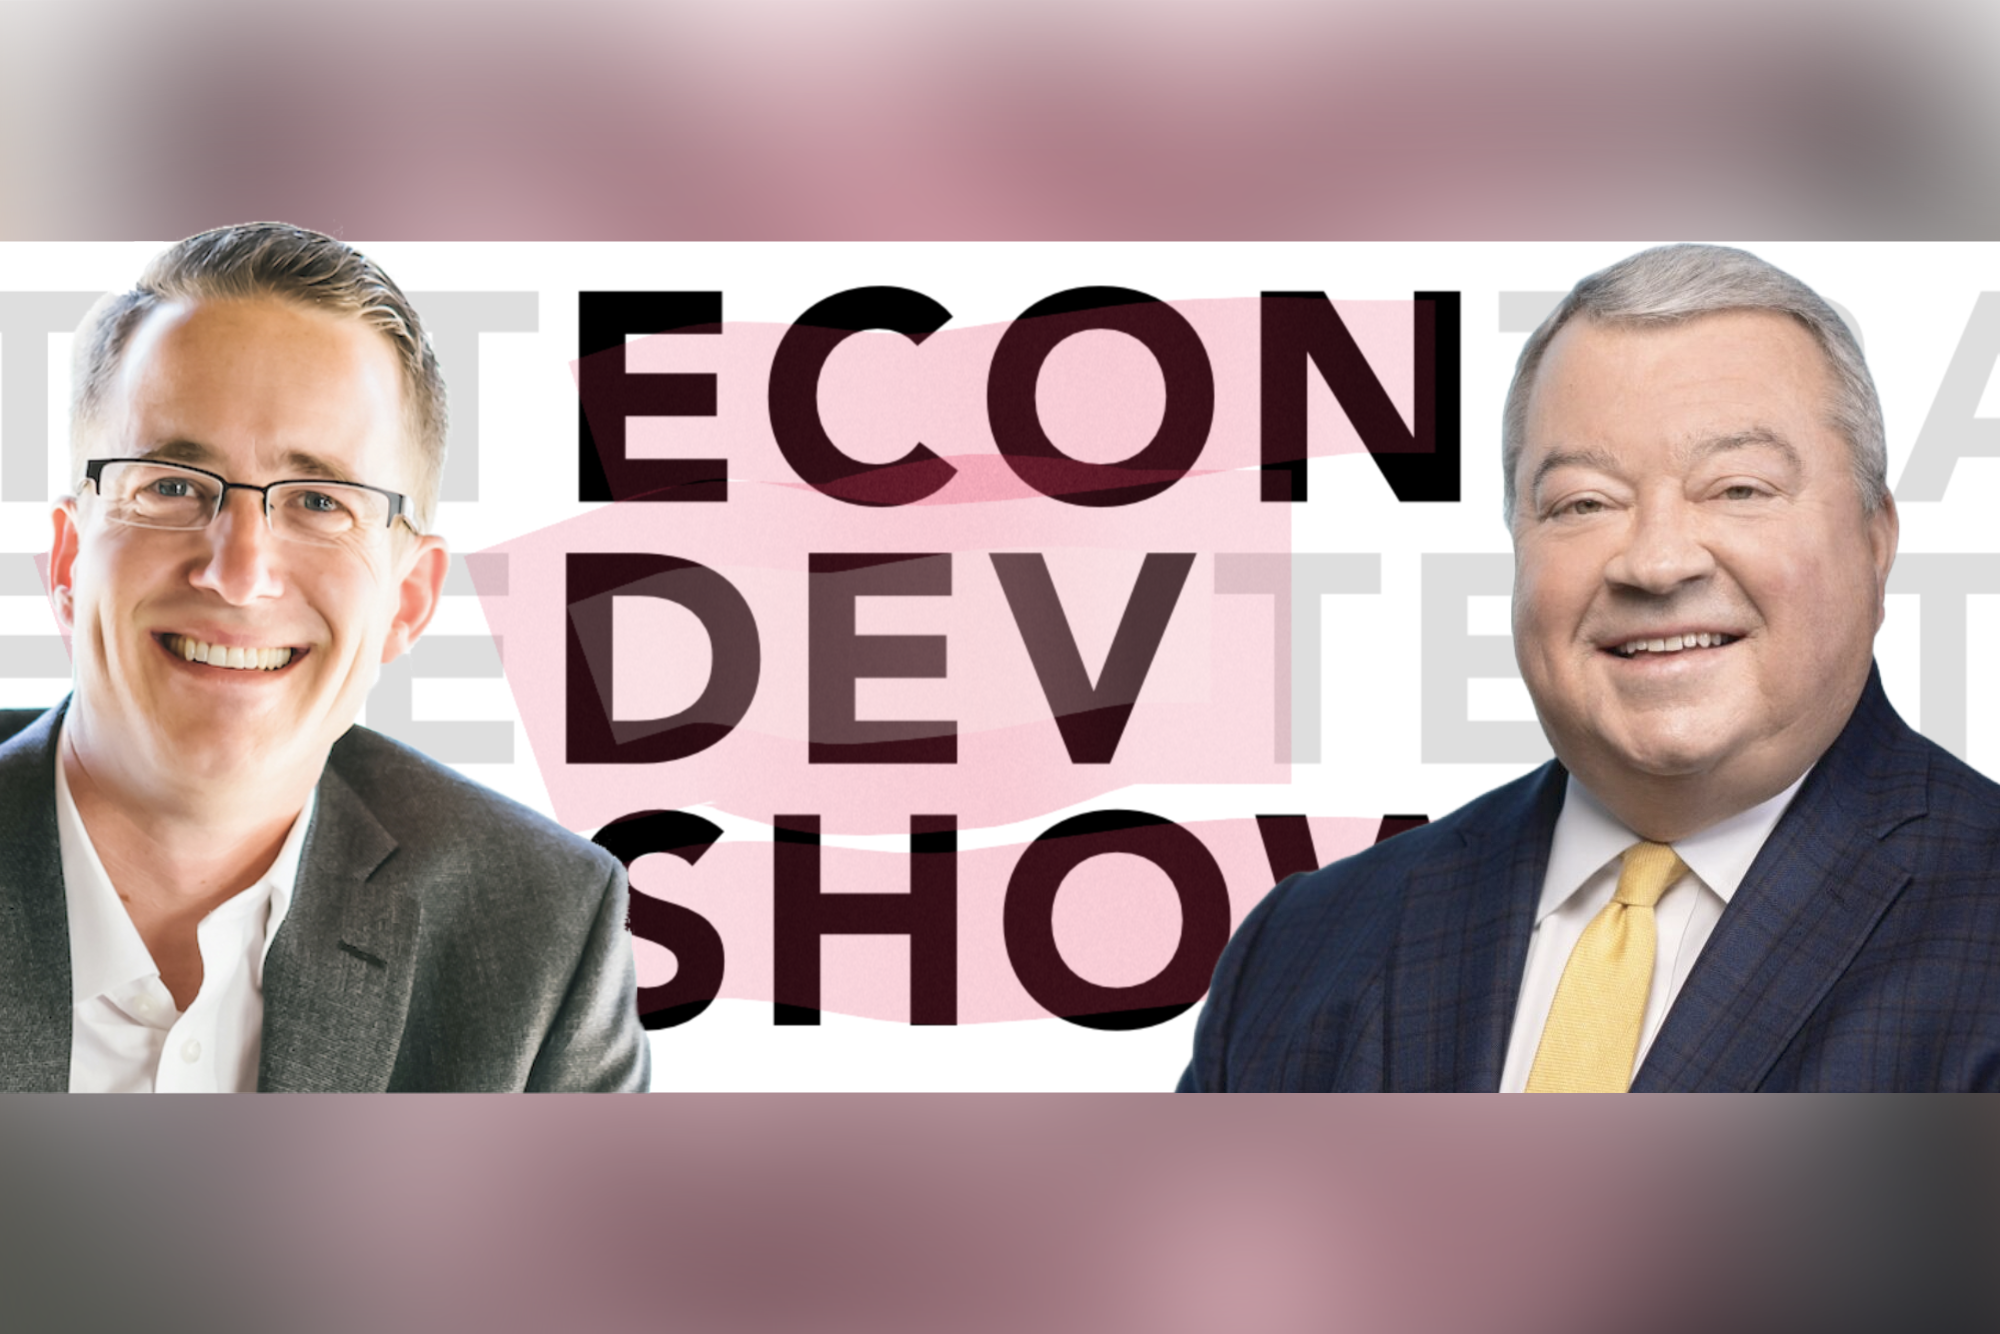 Podcast Episode #130: Talking Economic Development in Alabama with Greg Canfield